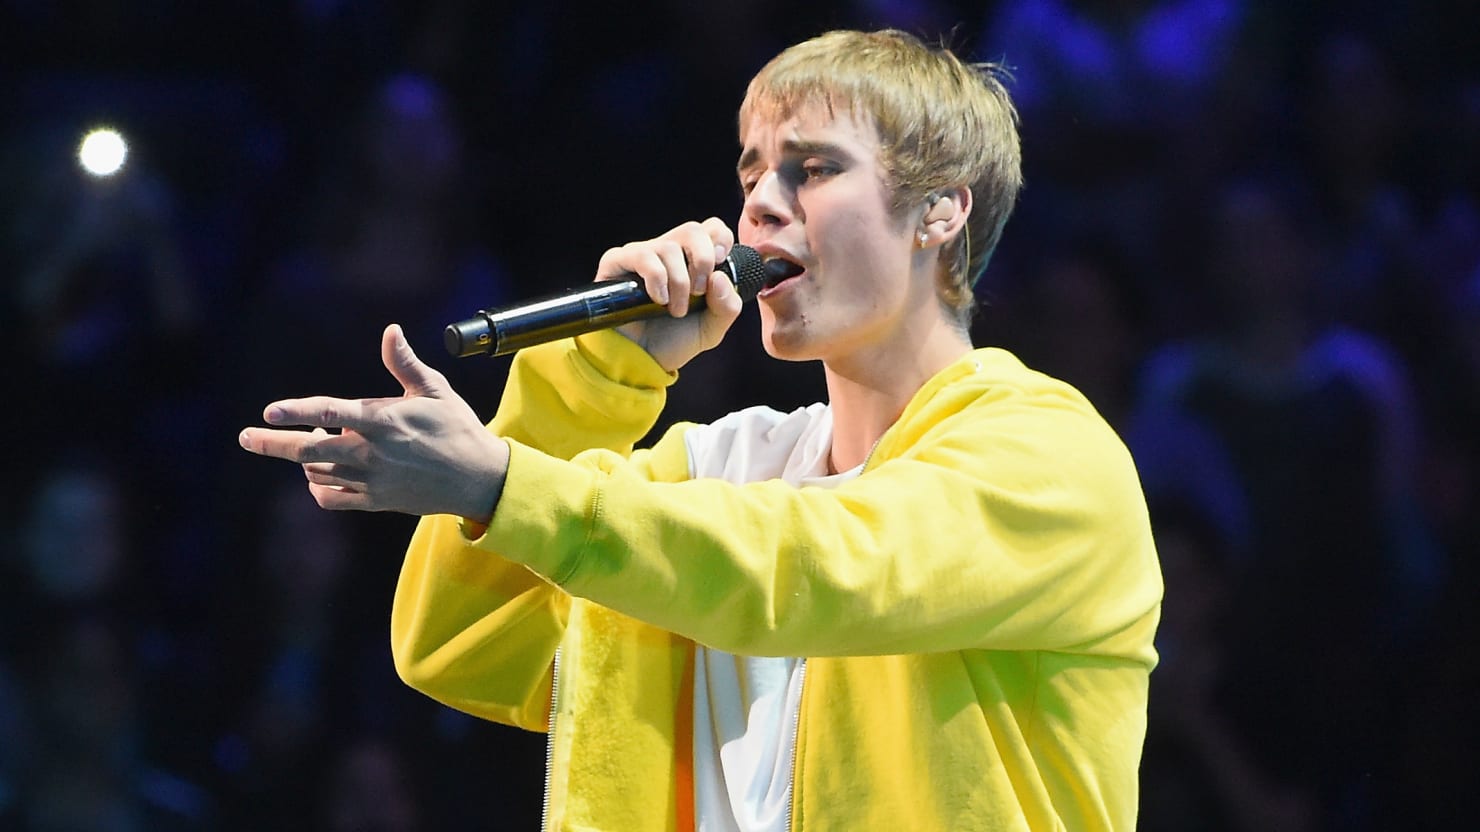 Justin Bieber Banned From Performing In China For ‘bad Behavior